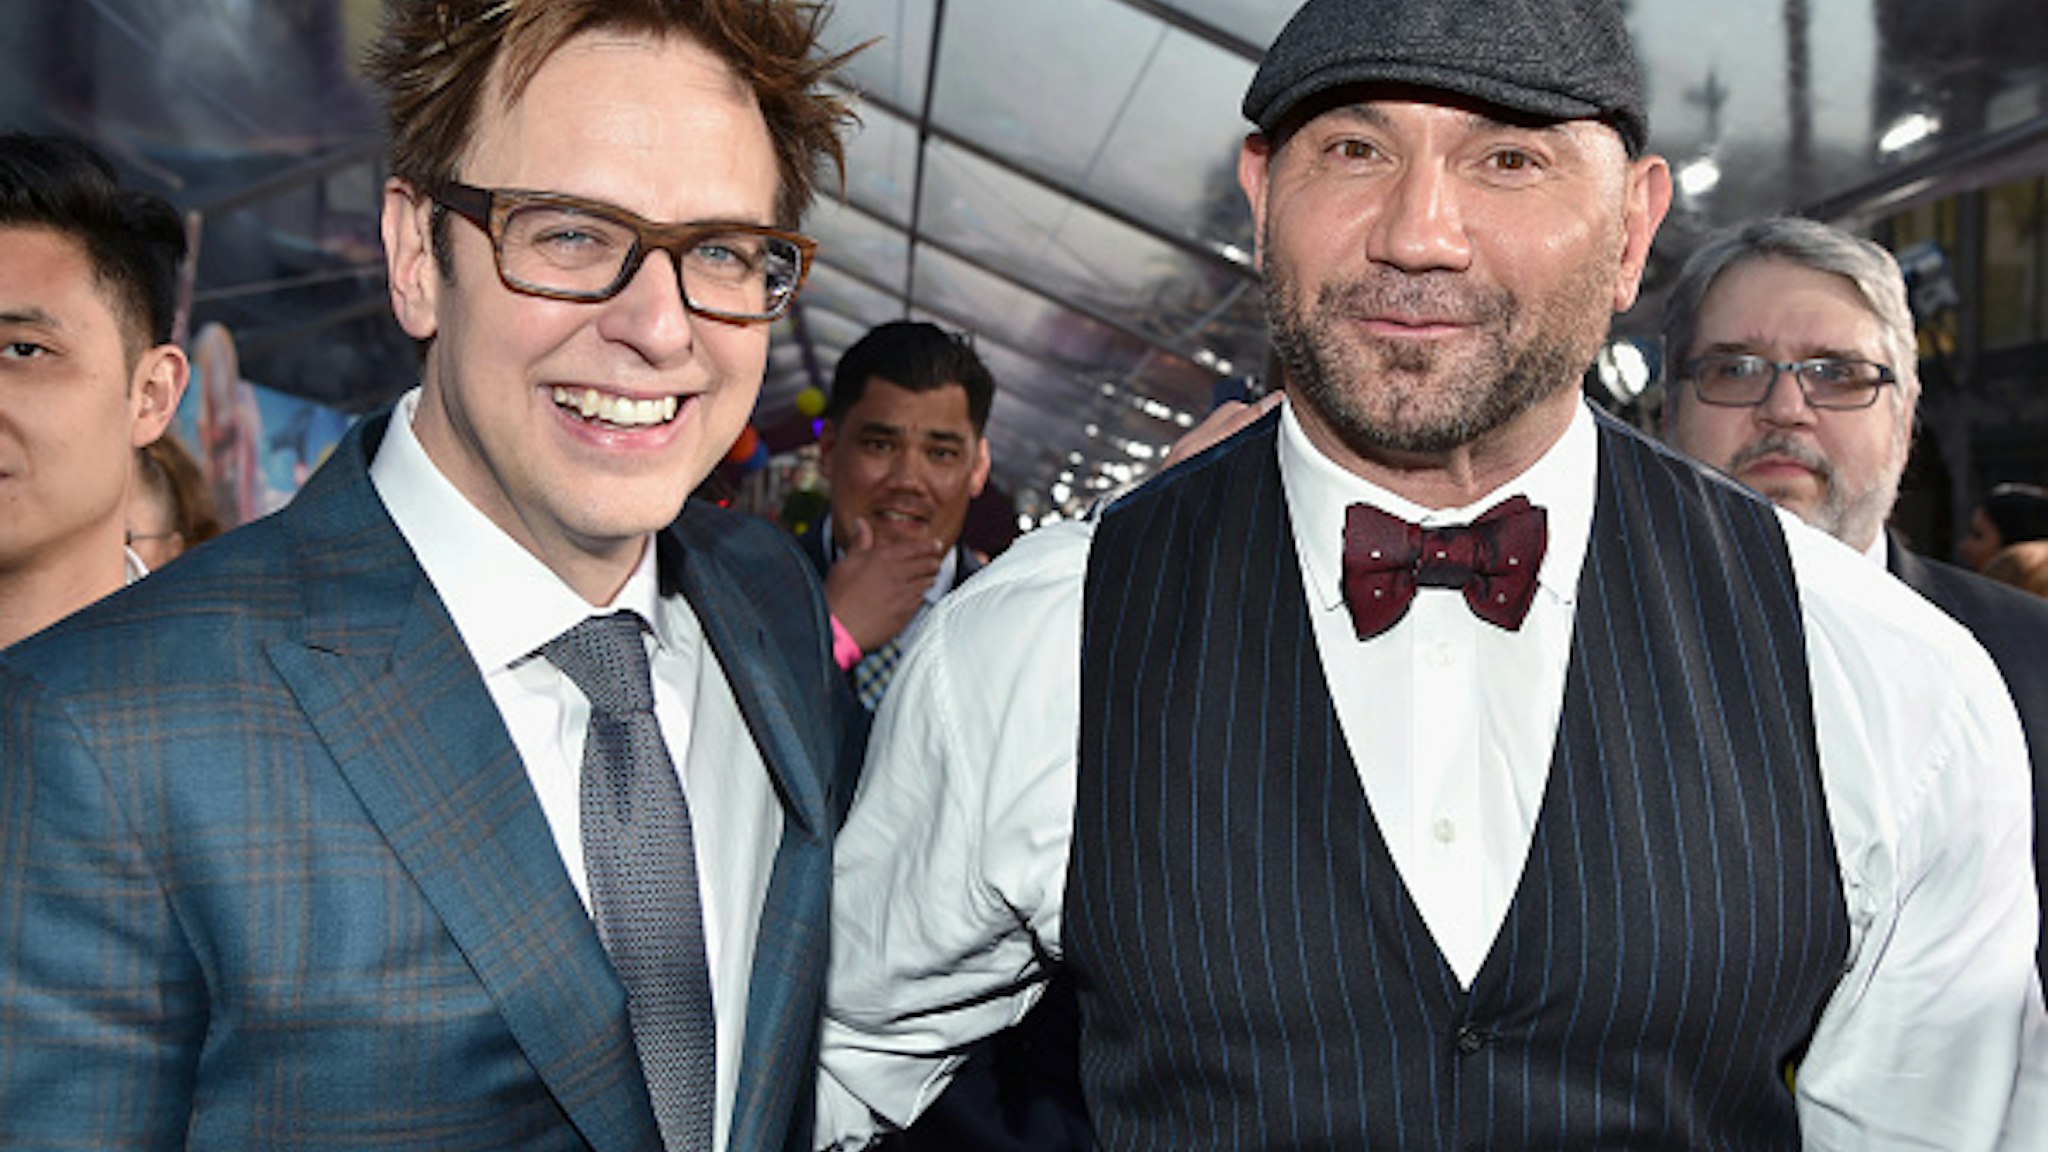 HOLLYWOOD, CA - APRIL 19: Director James Gunn (L) and actor Dave Bautista at the premiere of Disney and Marvel's "Guardians Of The Galaxy Vol. 2" at Dolby Theatre on April 19, 2017 in Hollywood, California.